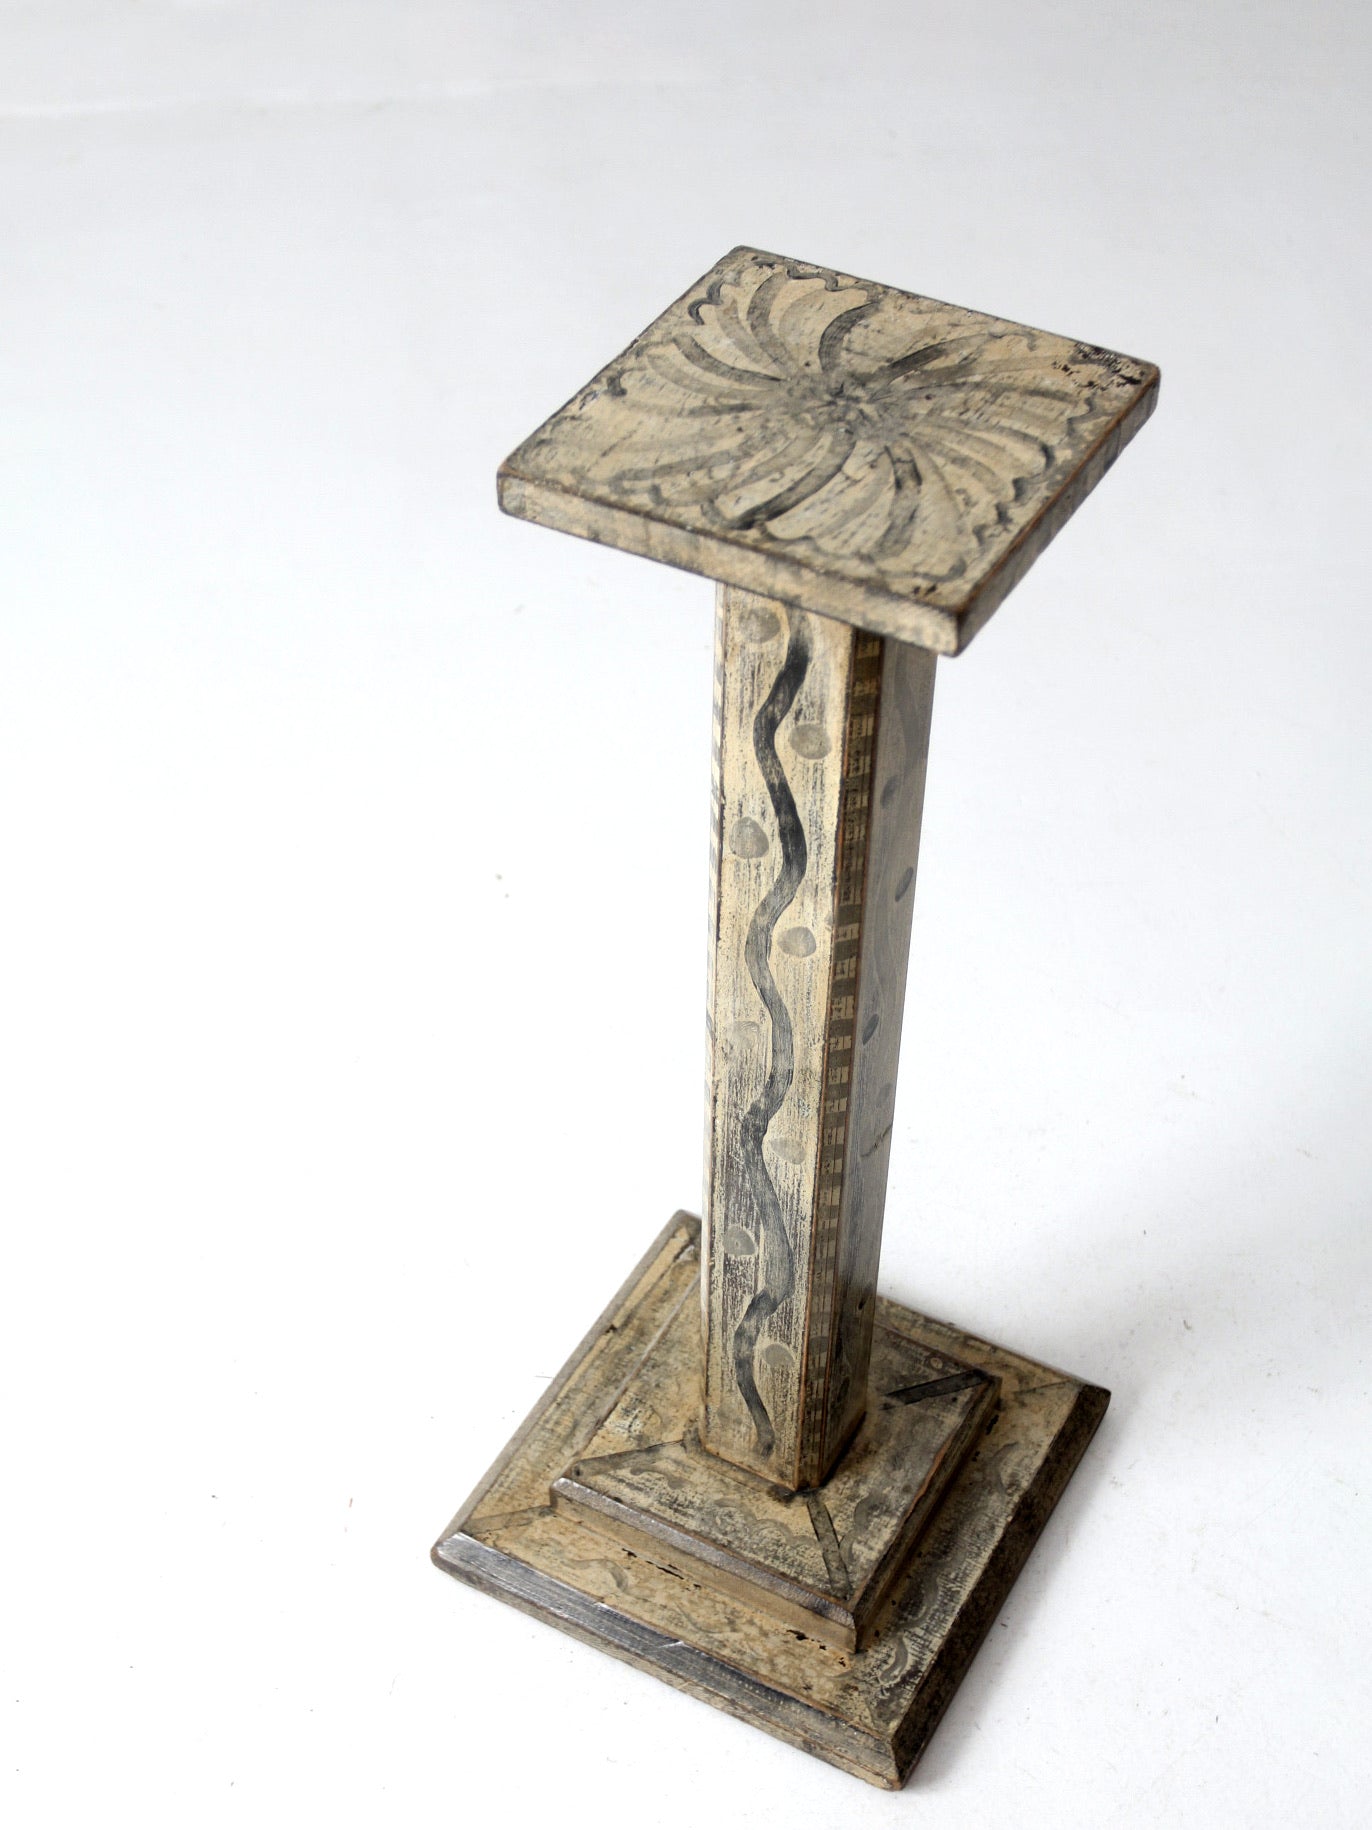 antique hand painted pedestal stand